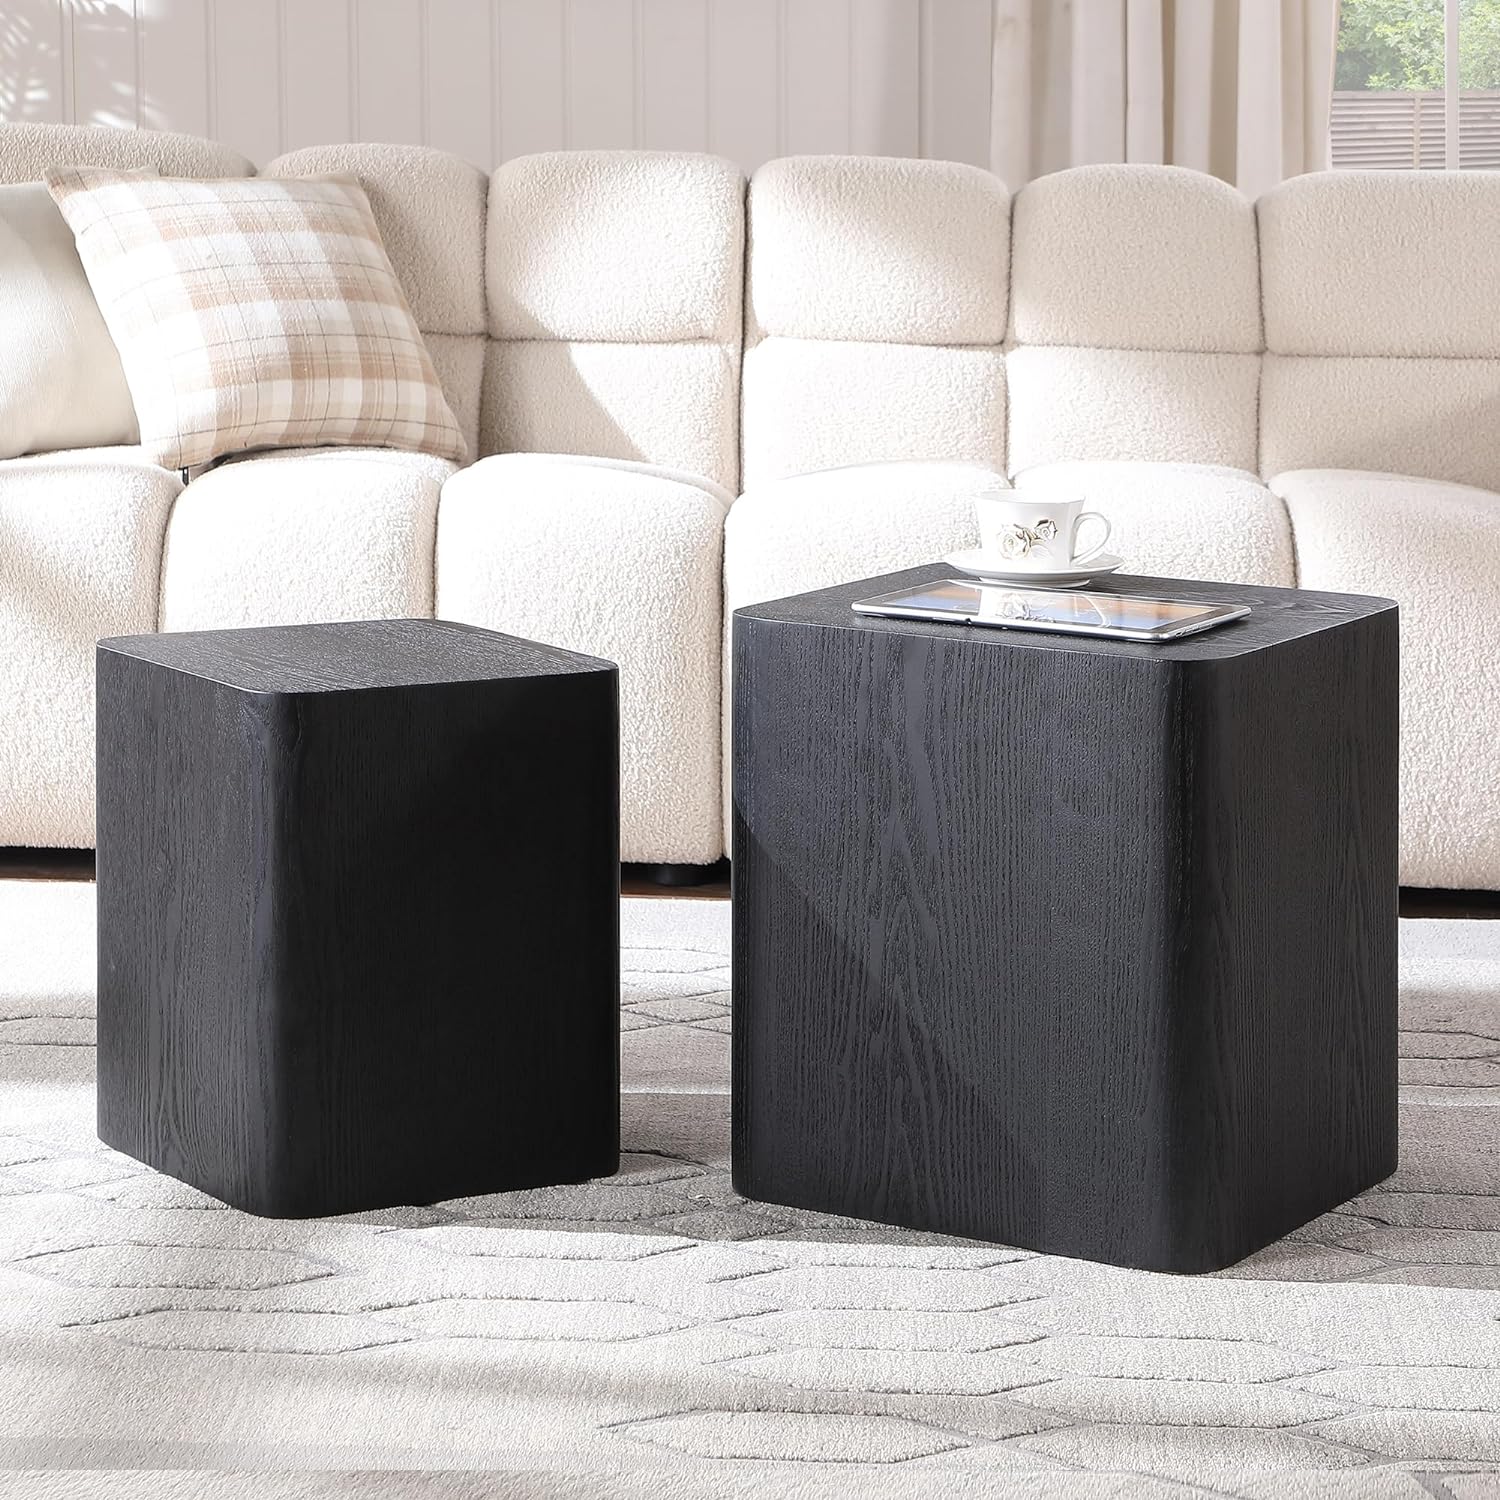 WILLIAMSPACE Nesting Table Set of 2, Black Nesting Coffee Tables Wooden Modern Table for Living Room Accent End Side Table, H18.25 (Black-Square)